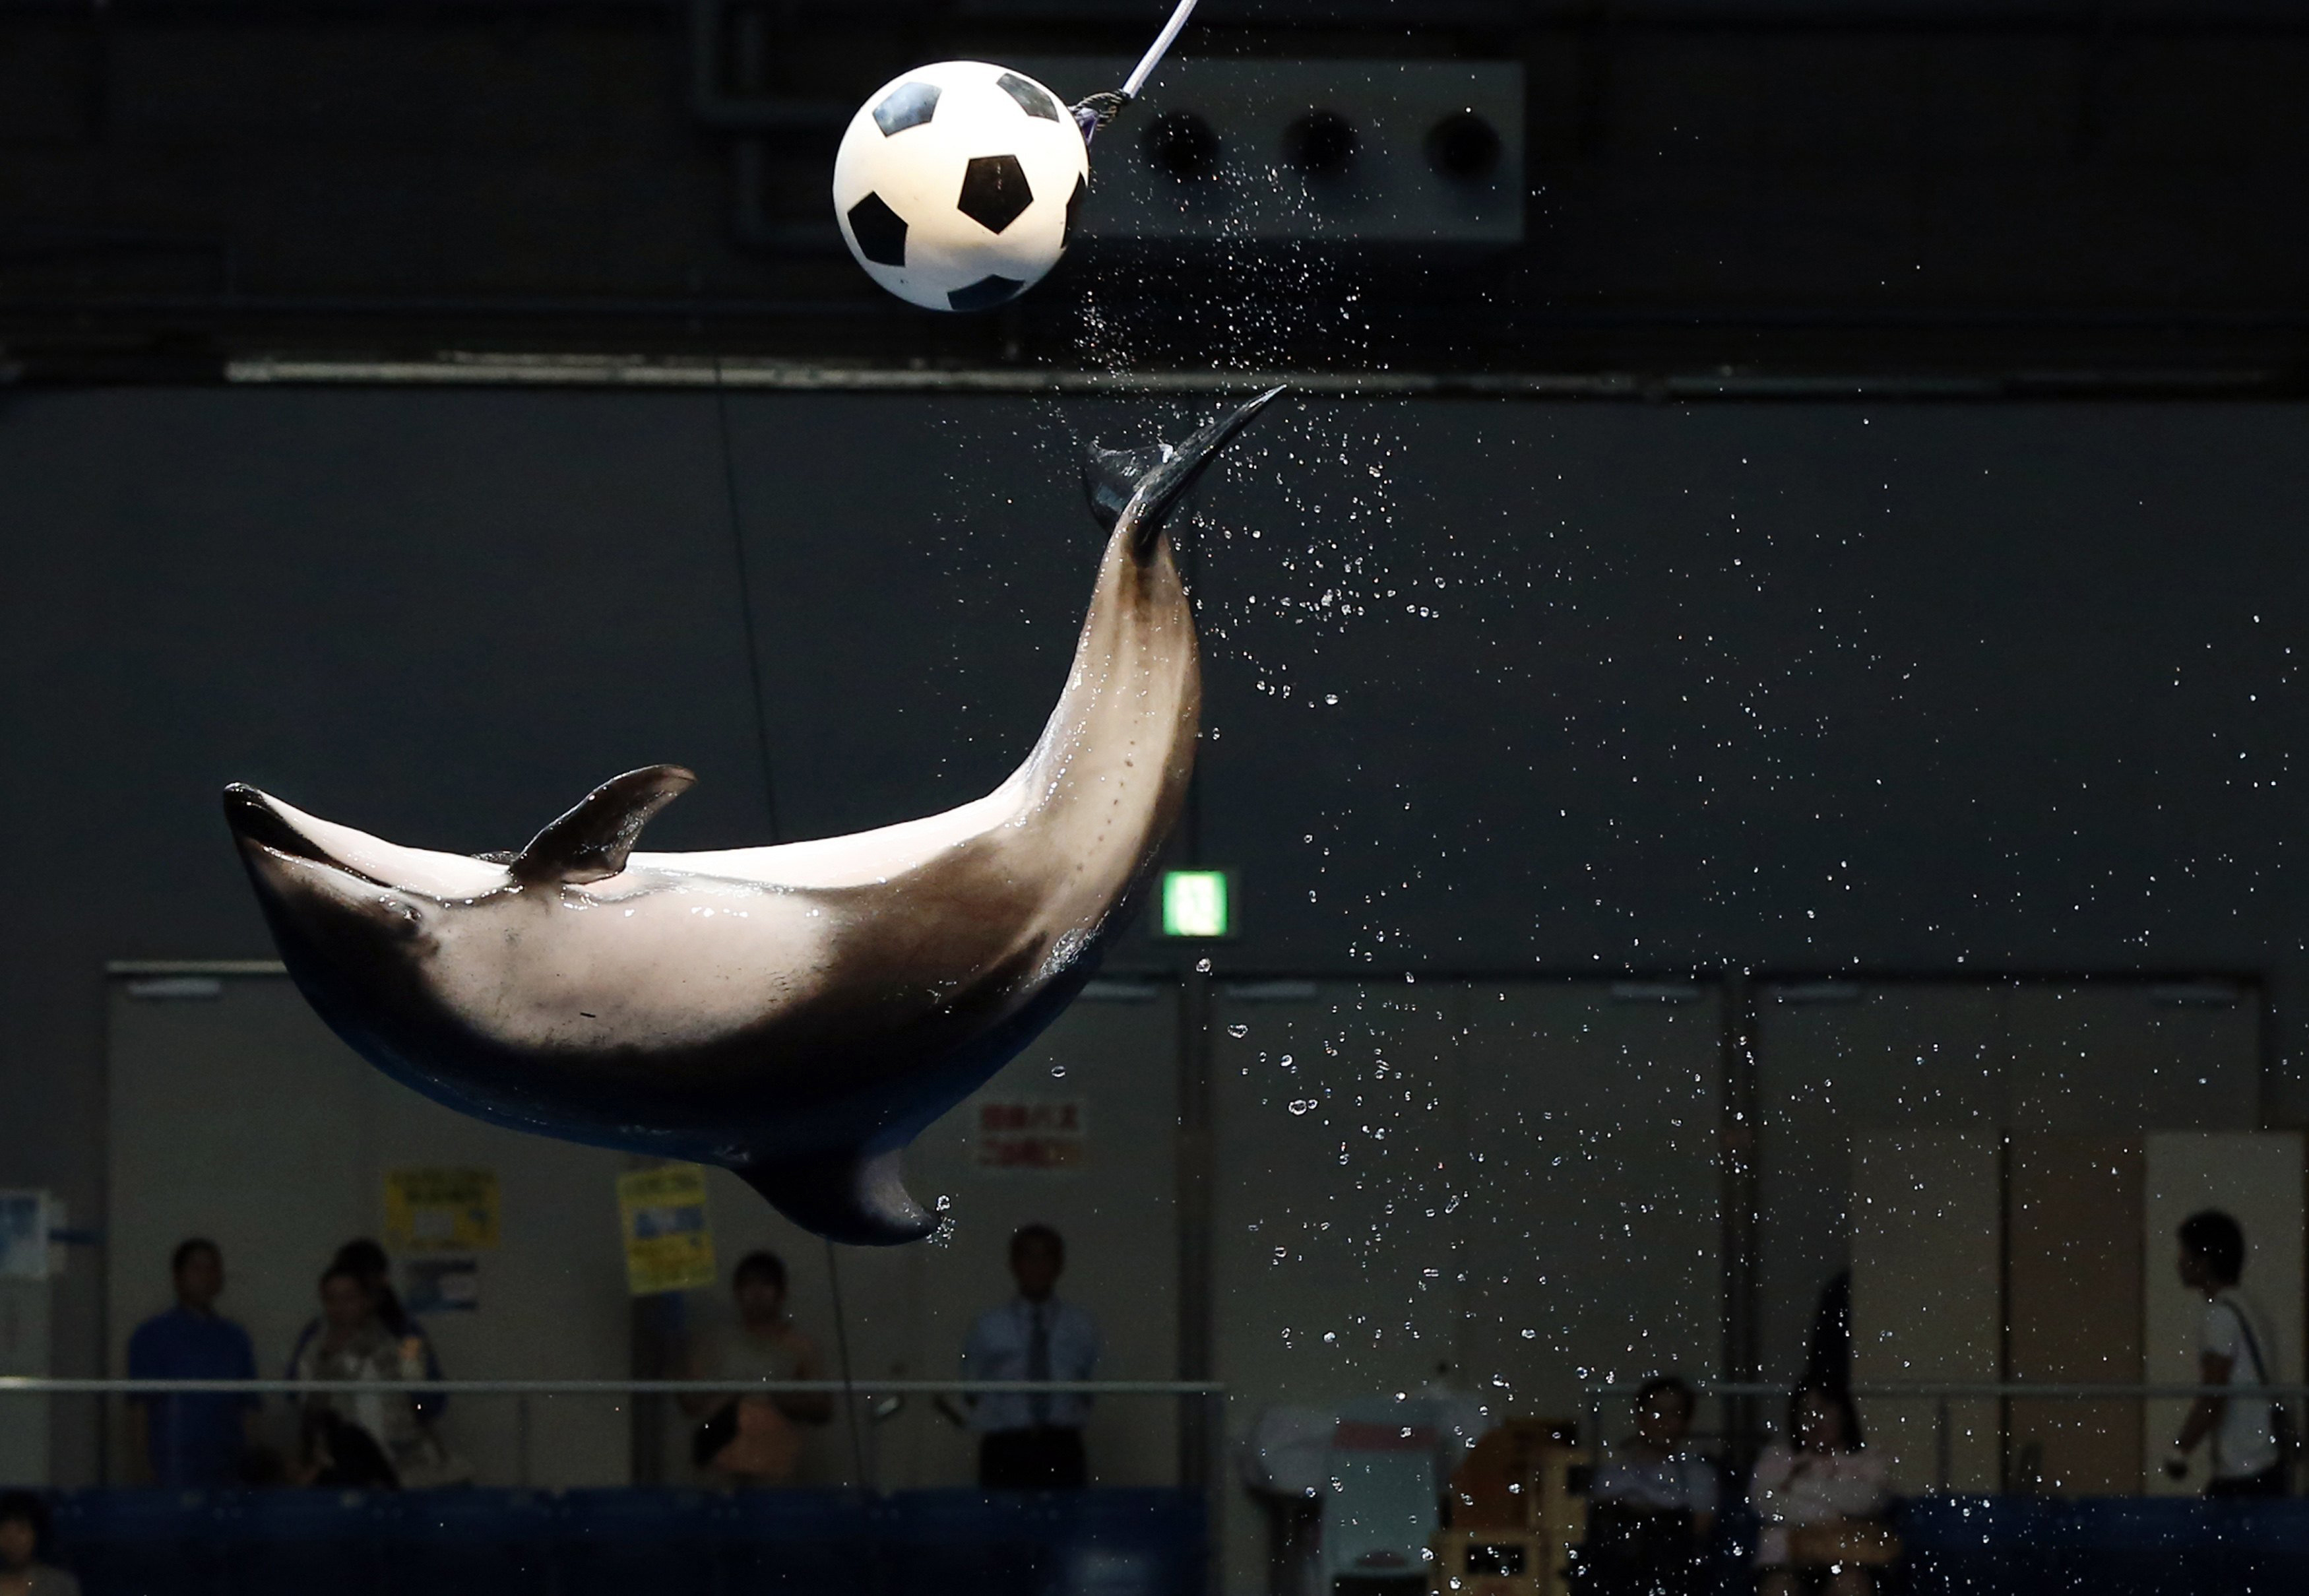 A dolphin jumps out of the water to knock a soccer ball in the air as part of an event in support of Japan's national soccer team at the 2014 World Cup during a show at Shinagawa Aqua Stadium aquarium in Tokyo on June 13, 2014.